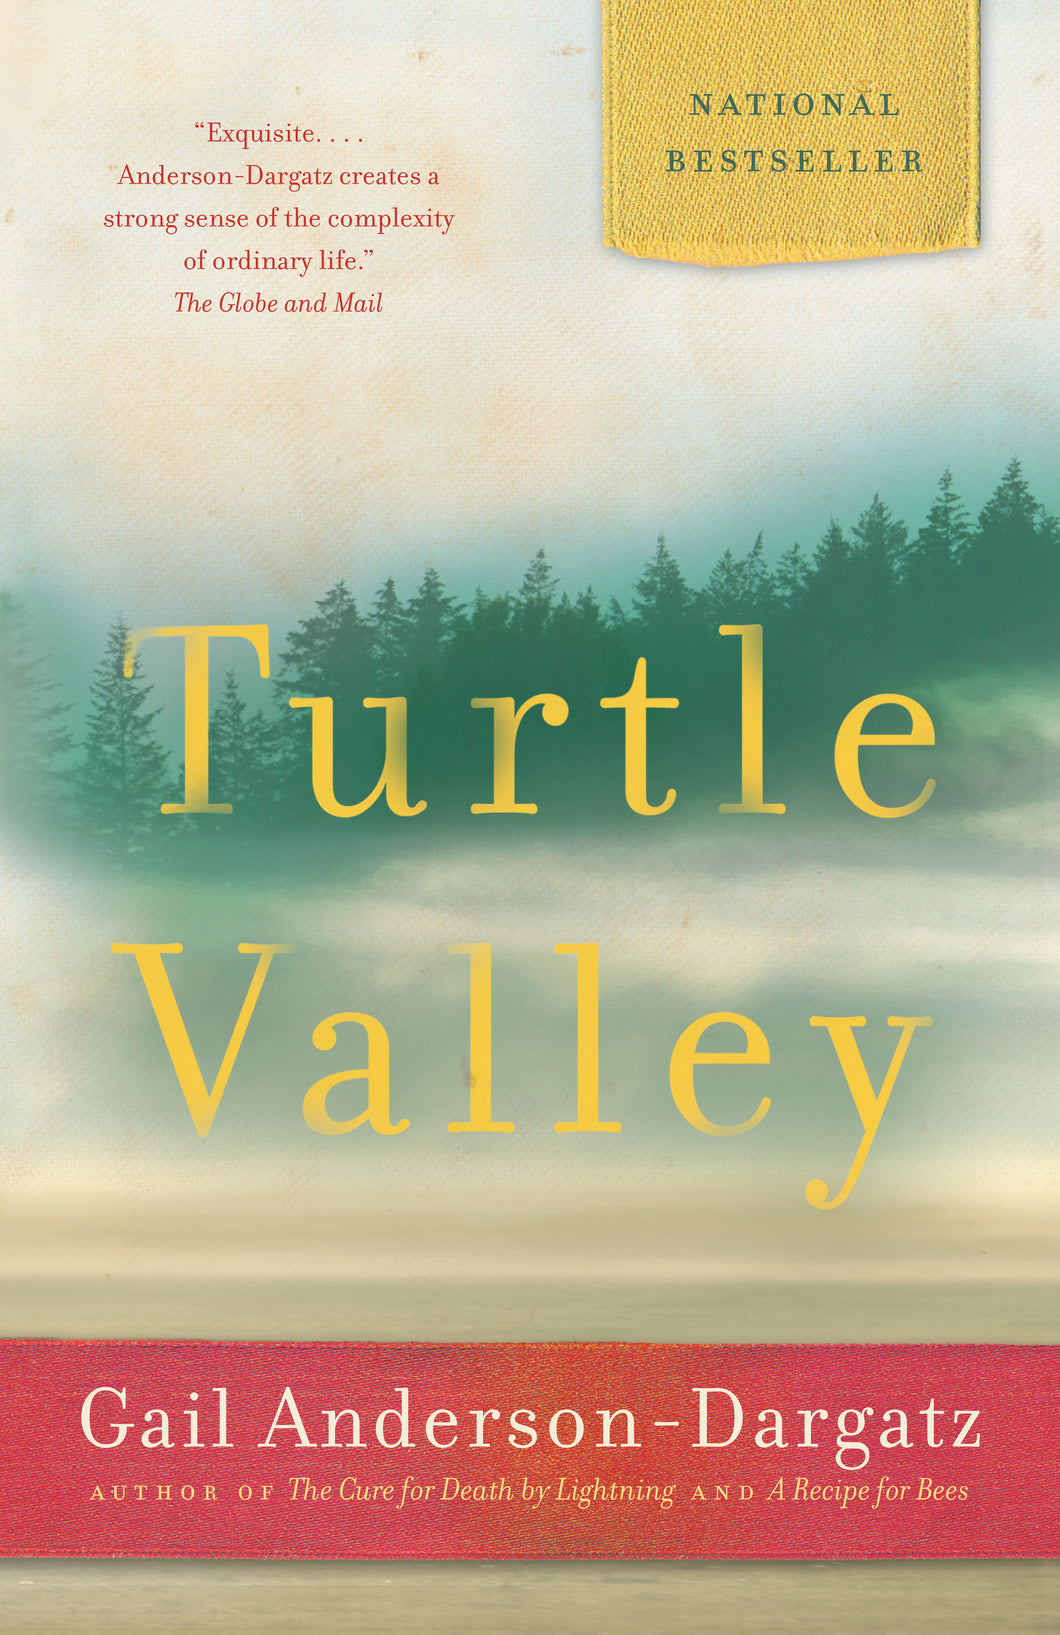 Turtle Valley